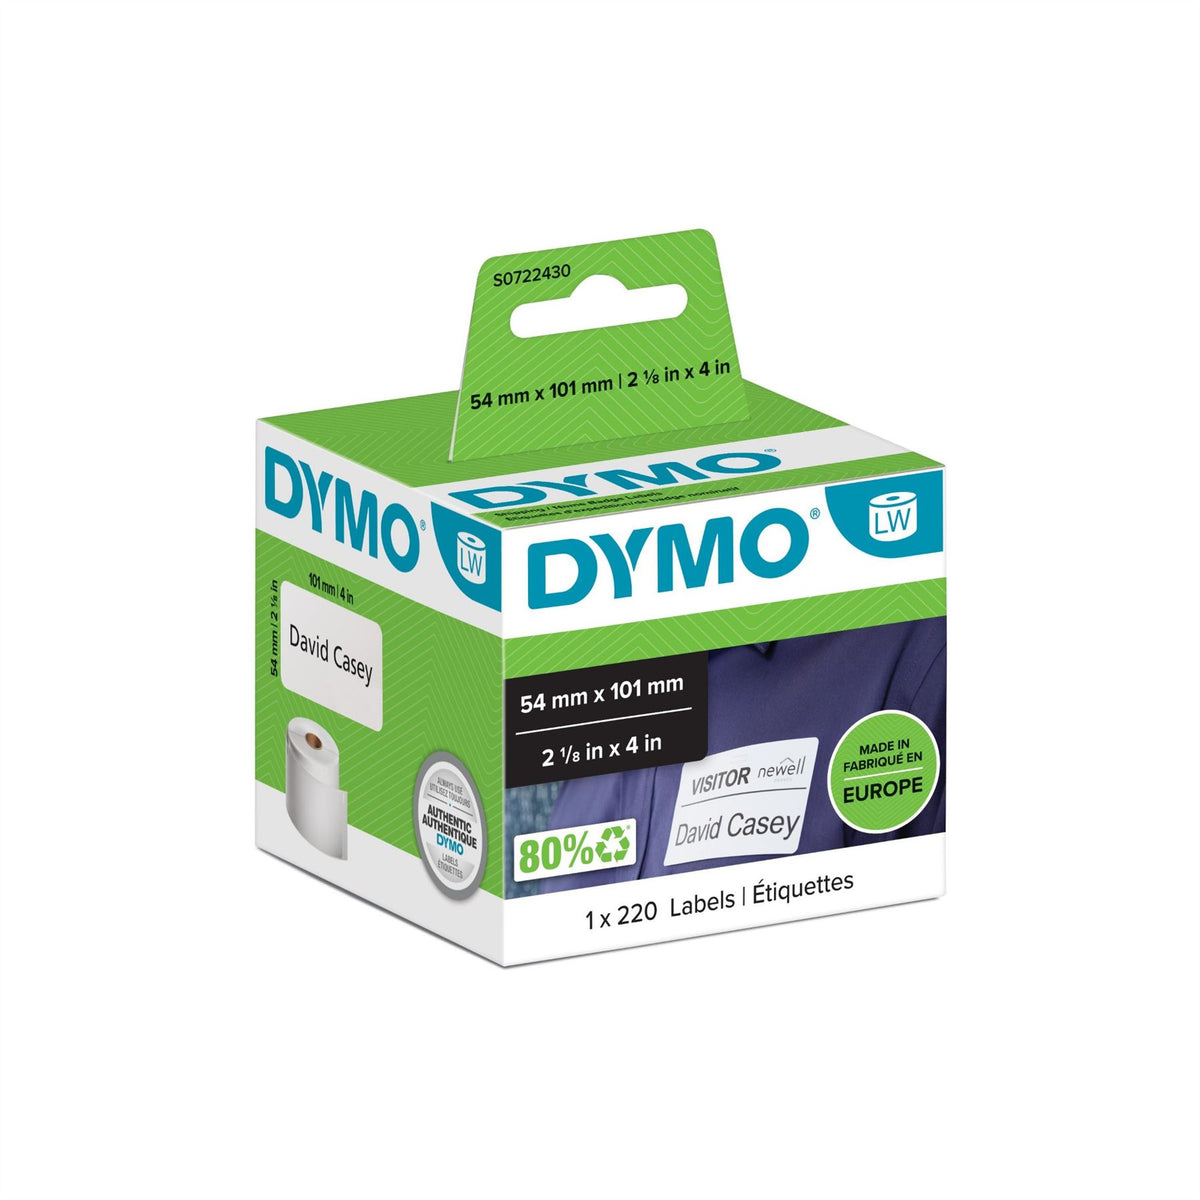 Dymo 99014/S0722430 DirectLabel-etikettes white 101mm x 54mm for Dymo 400 Duo/60mm